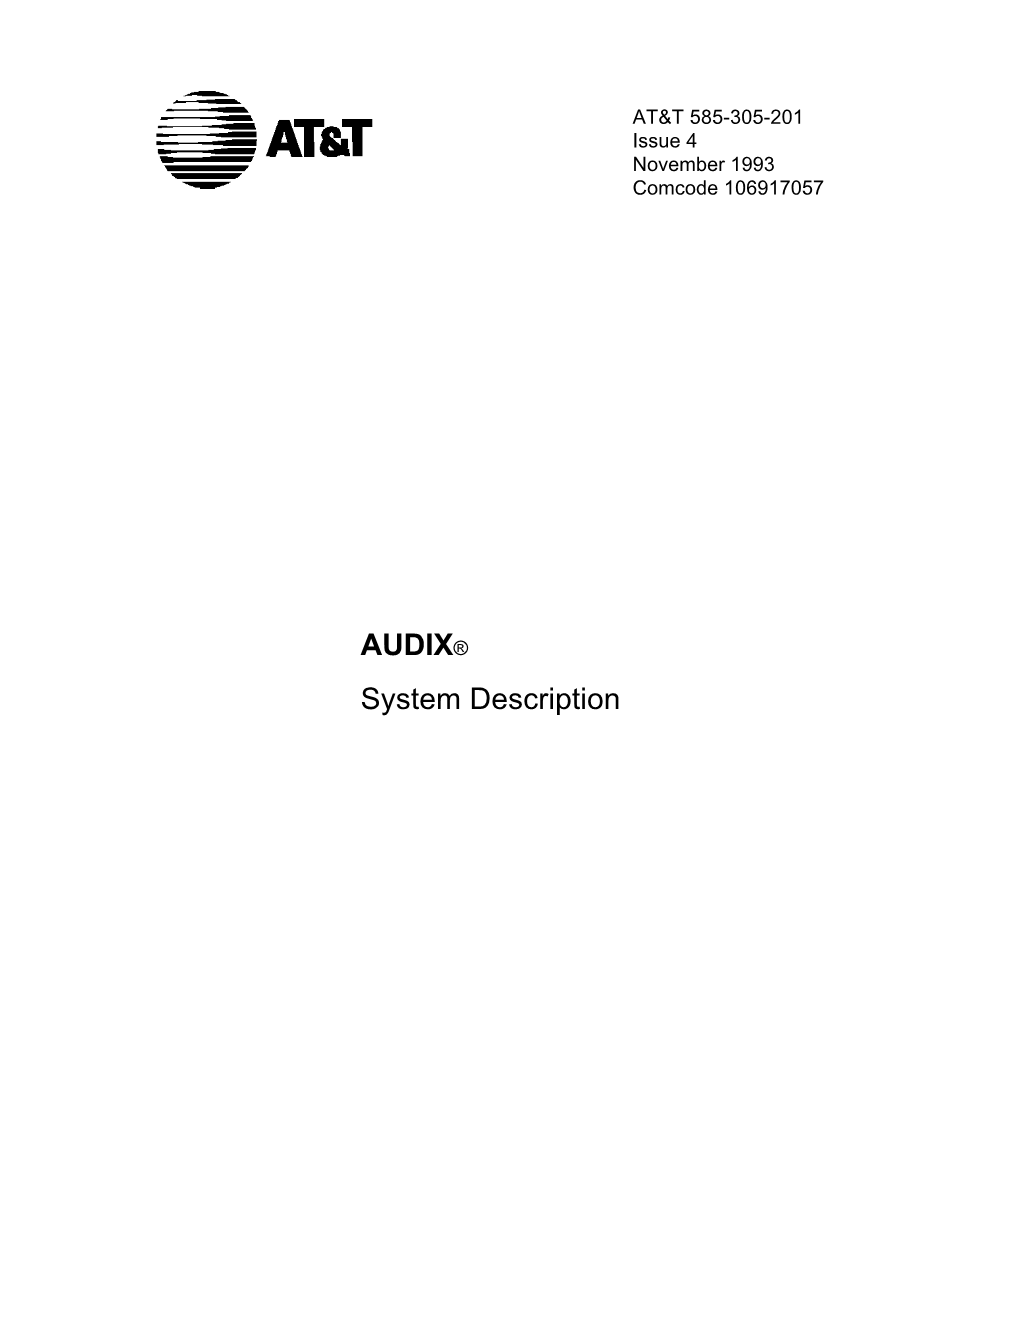 AUDIX® System Description Copyright  1995 AT&T All Rights Reserved Printed in U.S.A